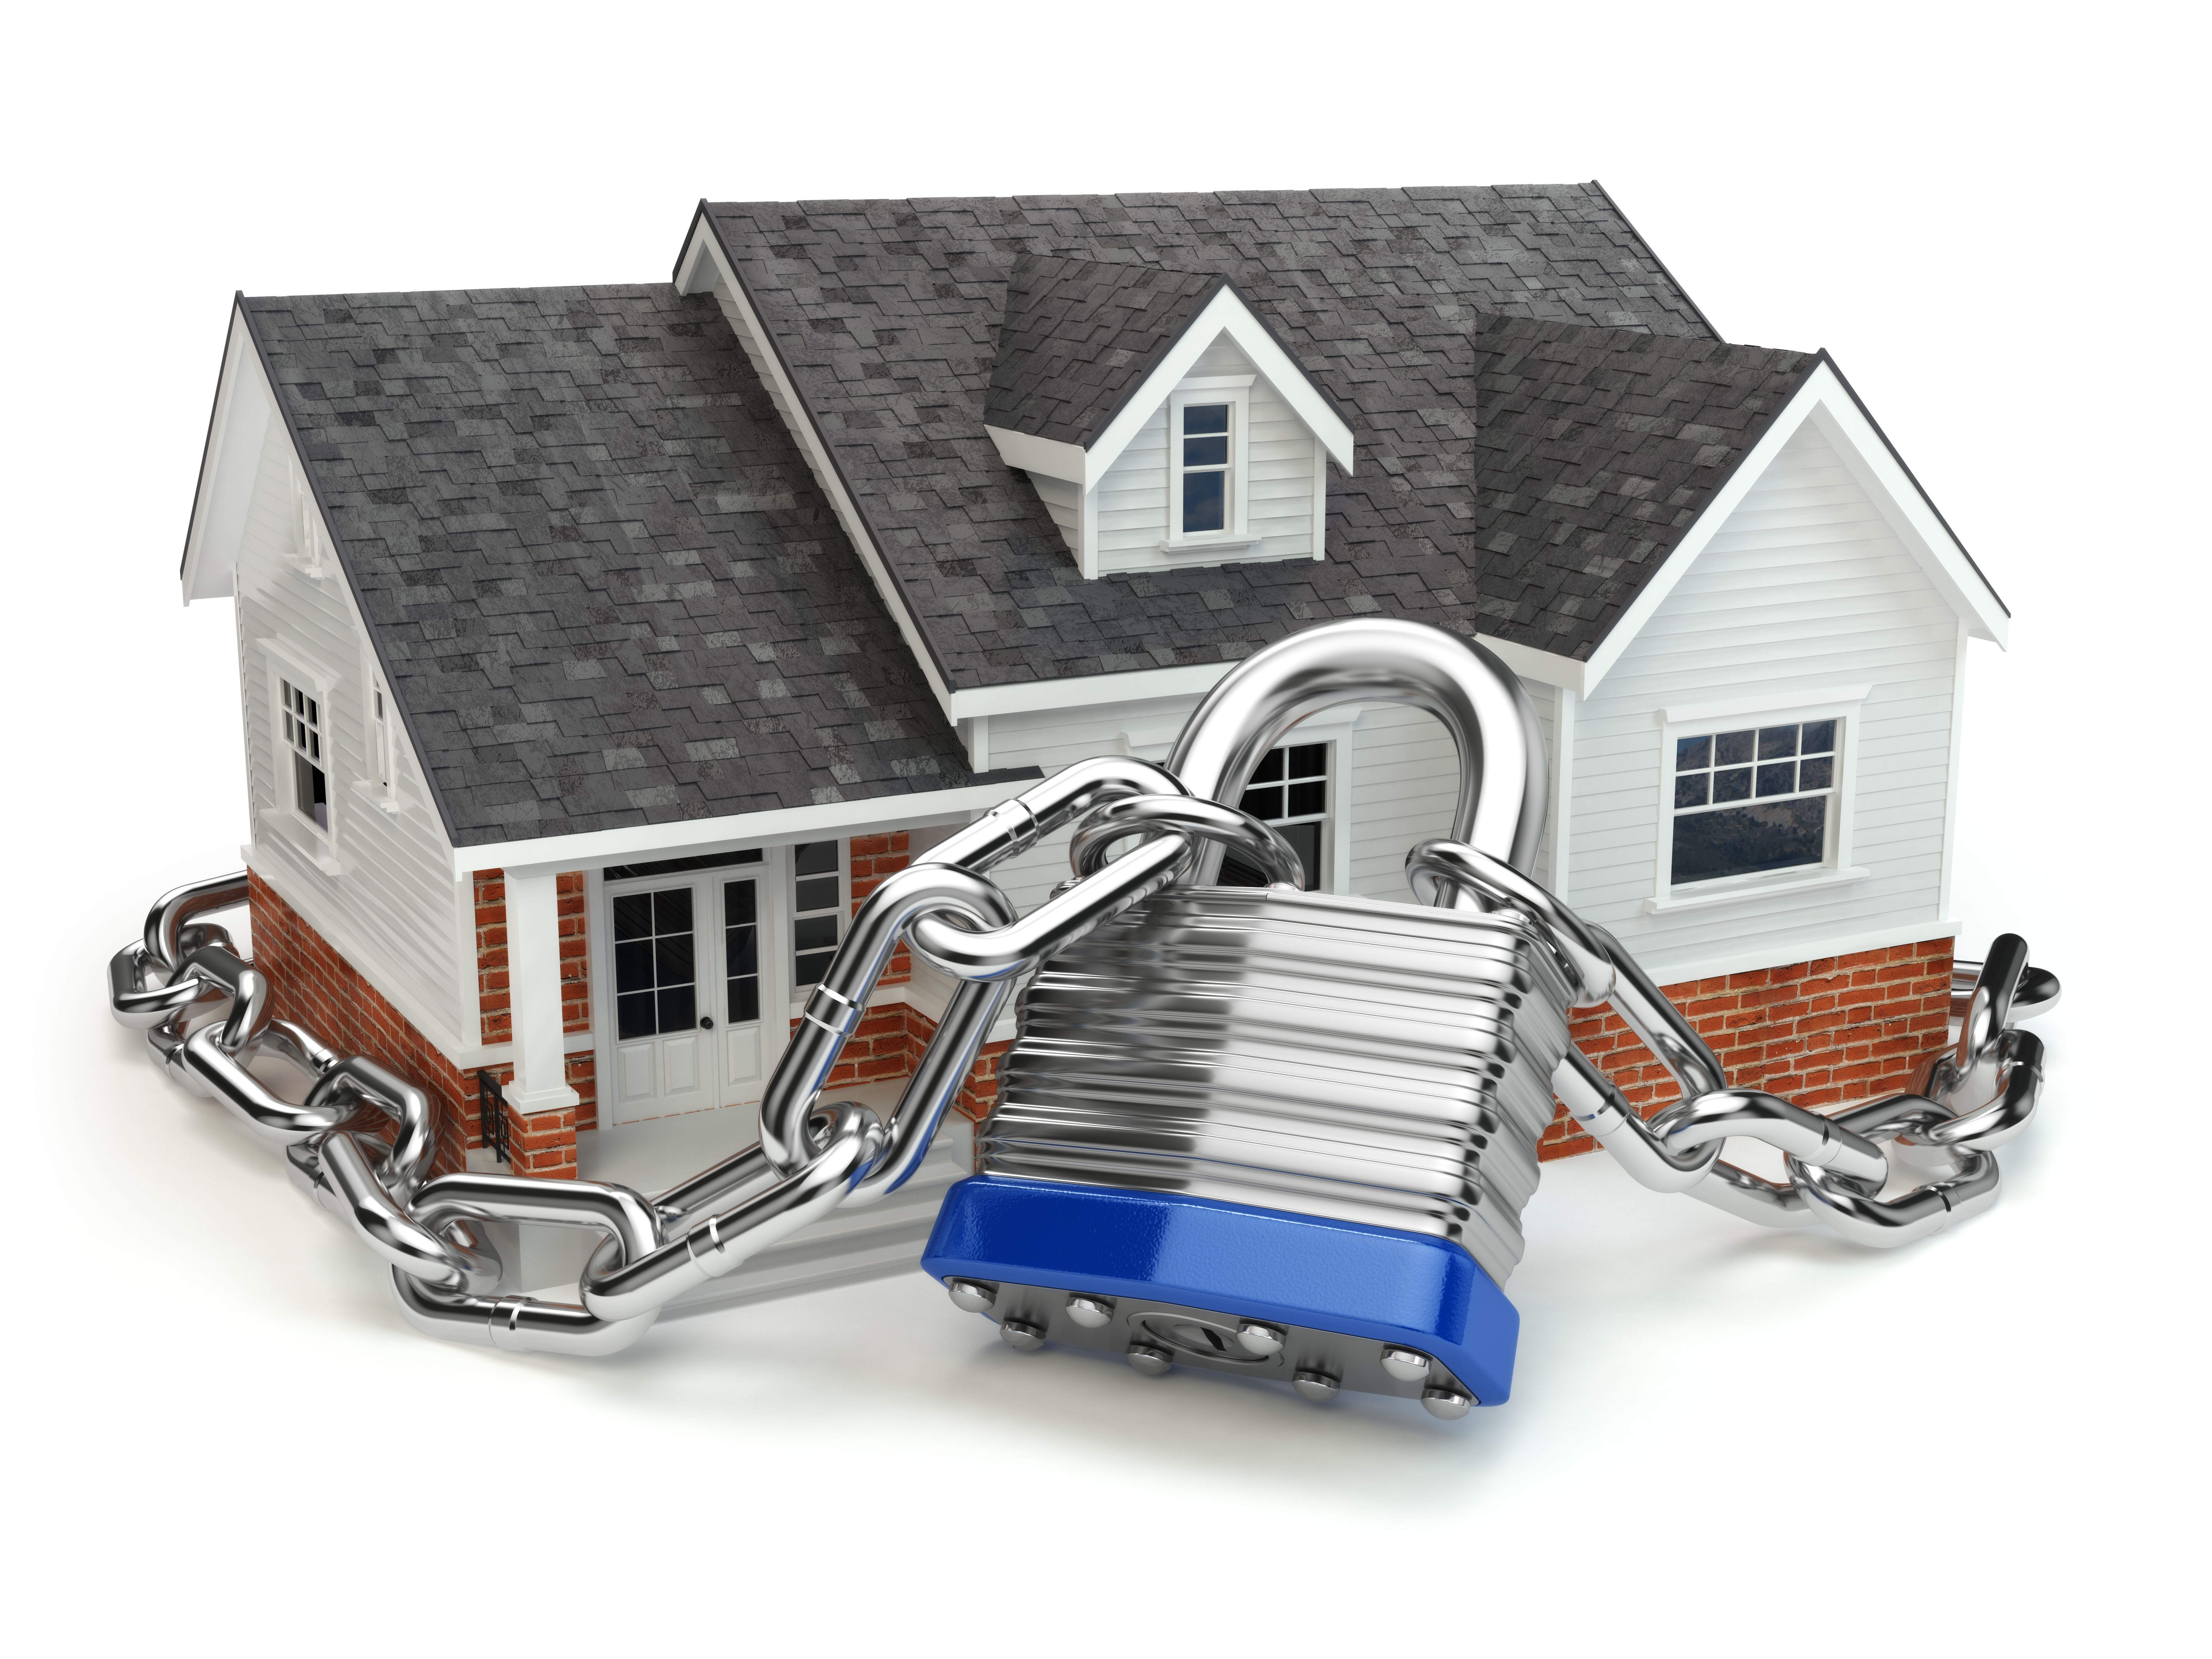 Home Security Concept. House With Lock And Chain. 3d